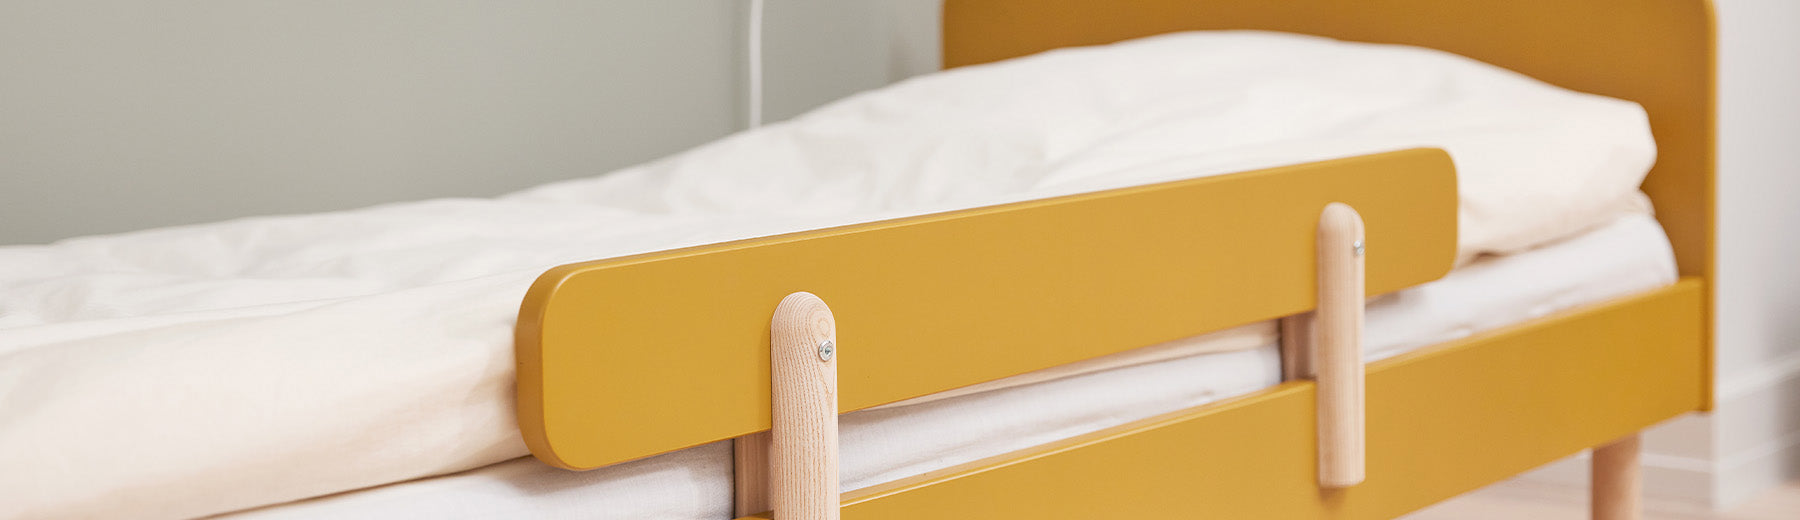 FLEXA single bed with a safety rail